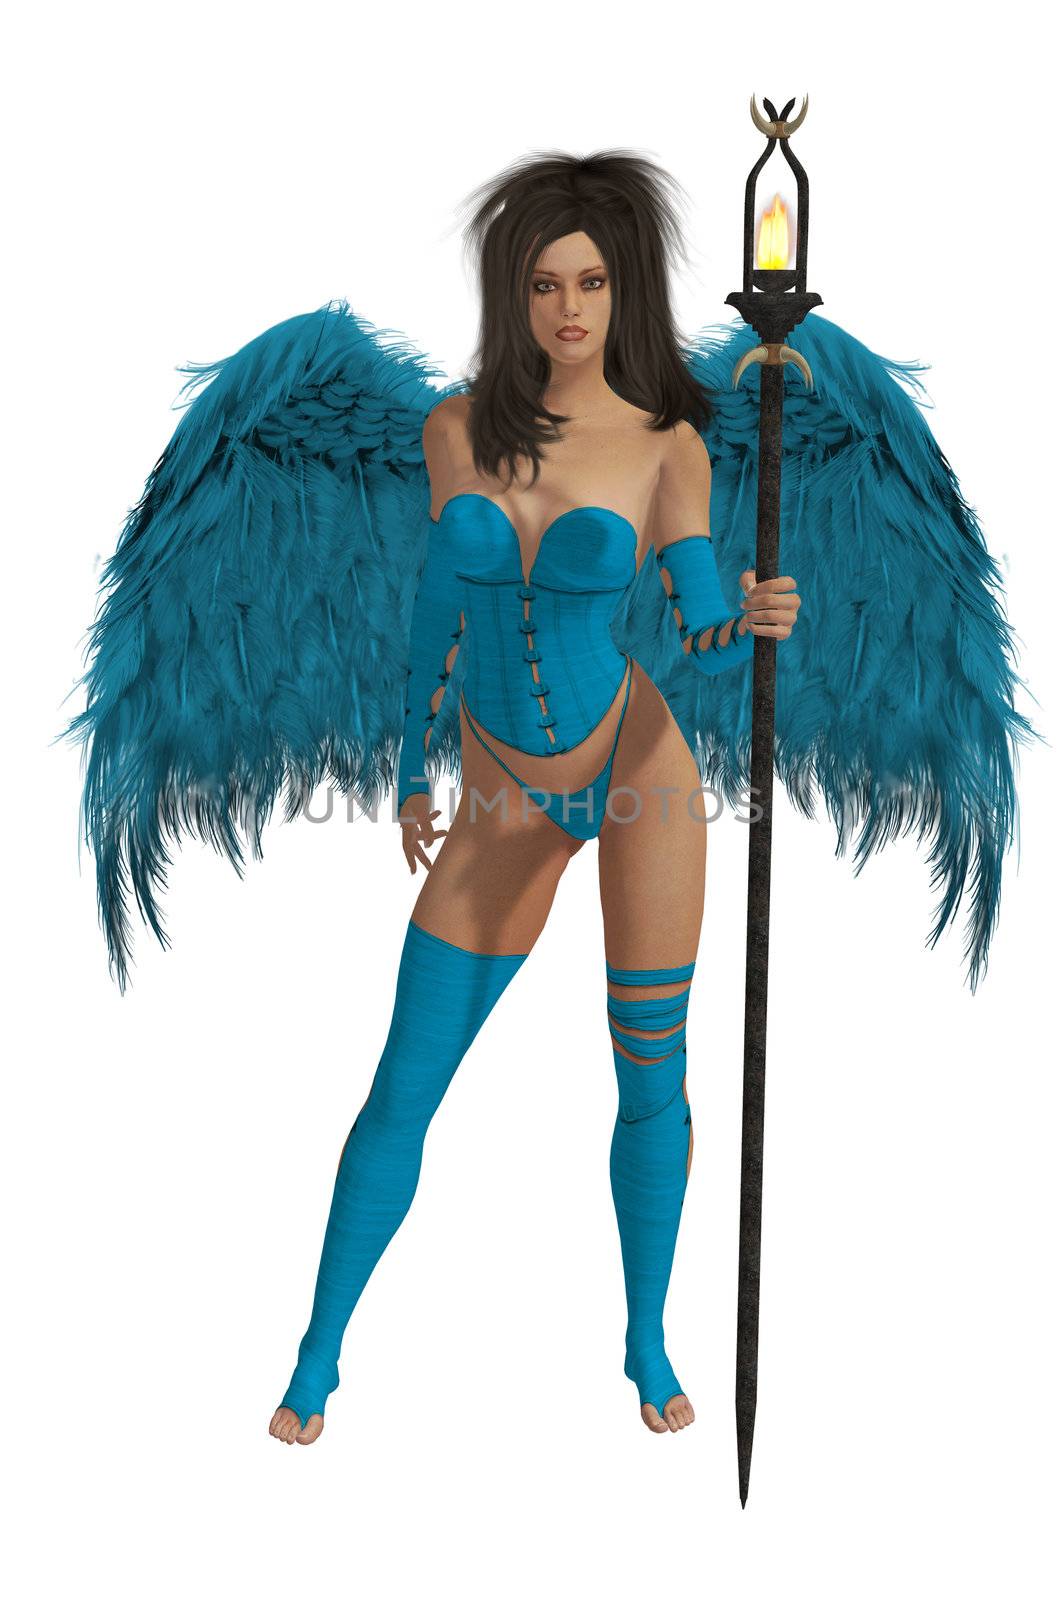 Baby Blue Winged Angel With Dark Hair by kathygold